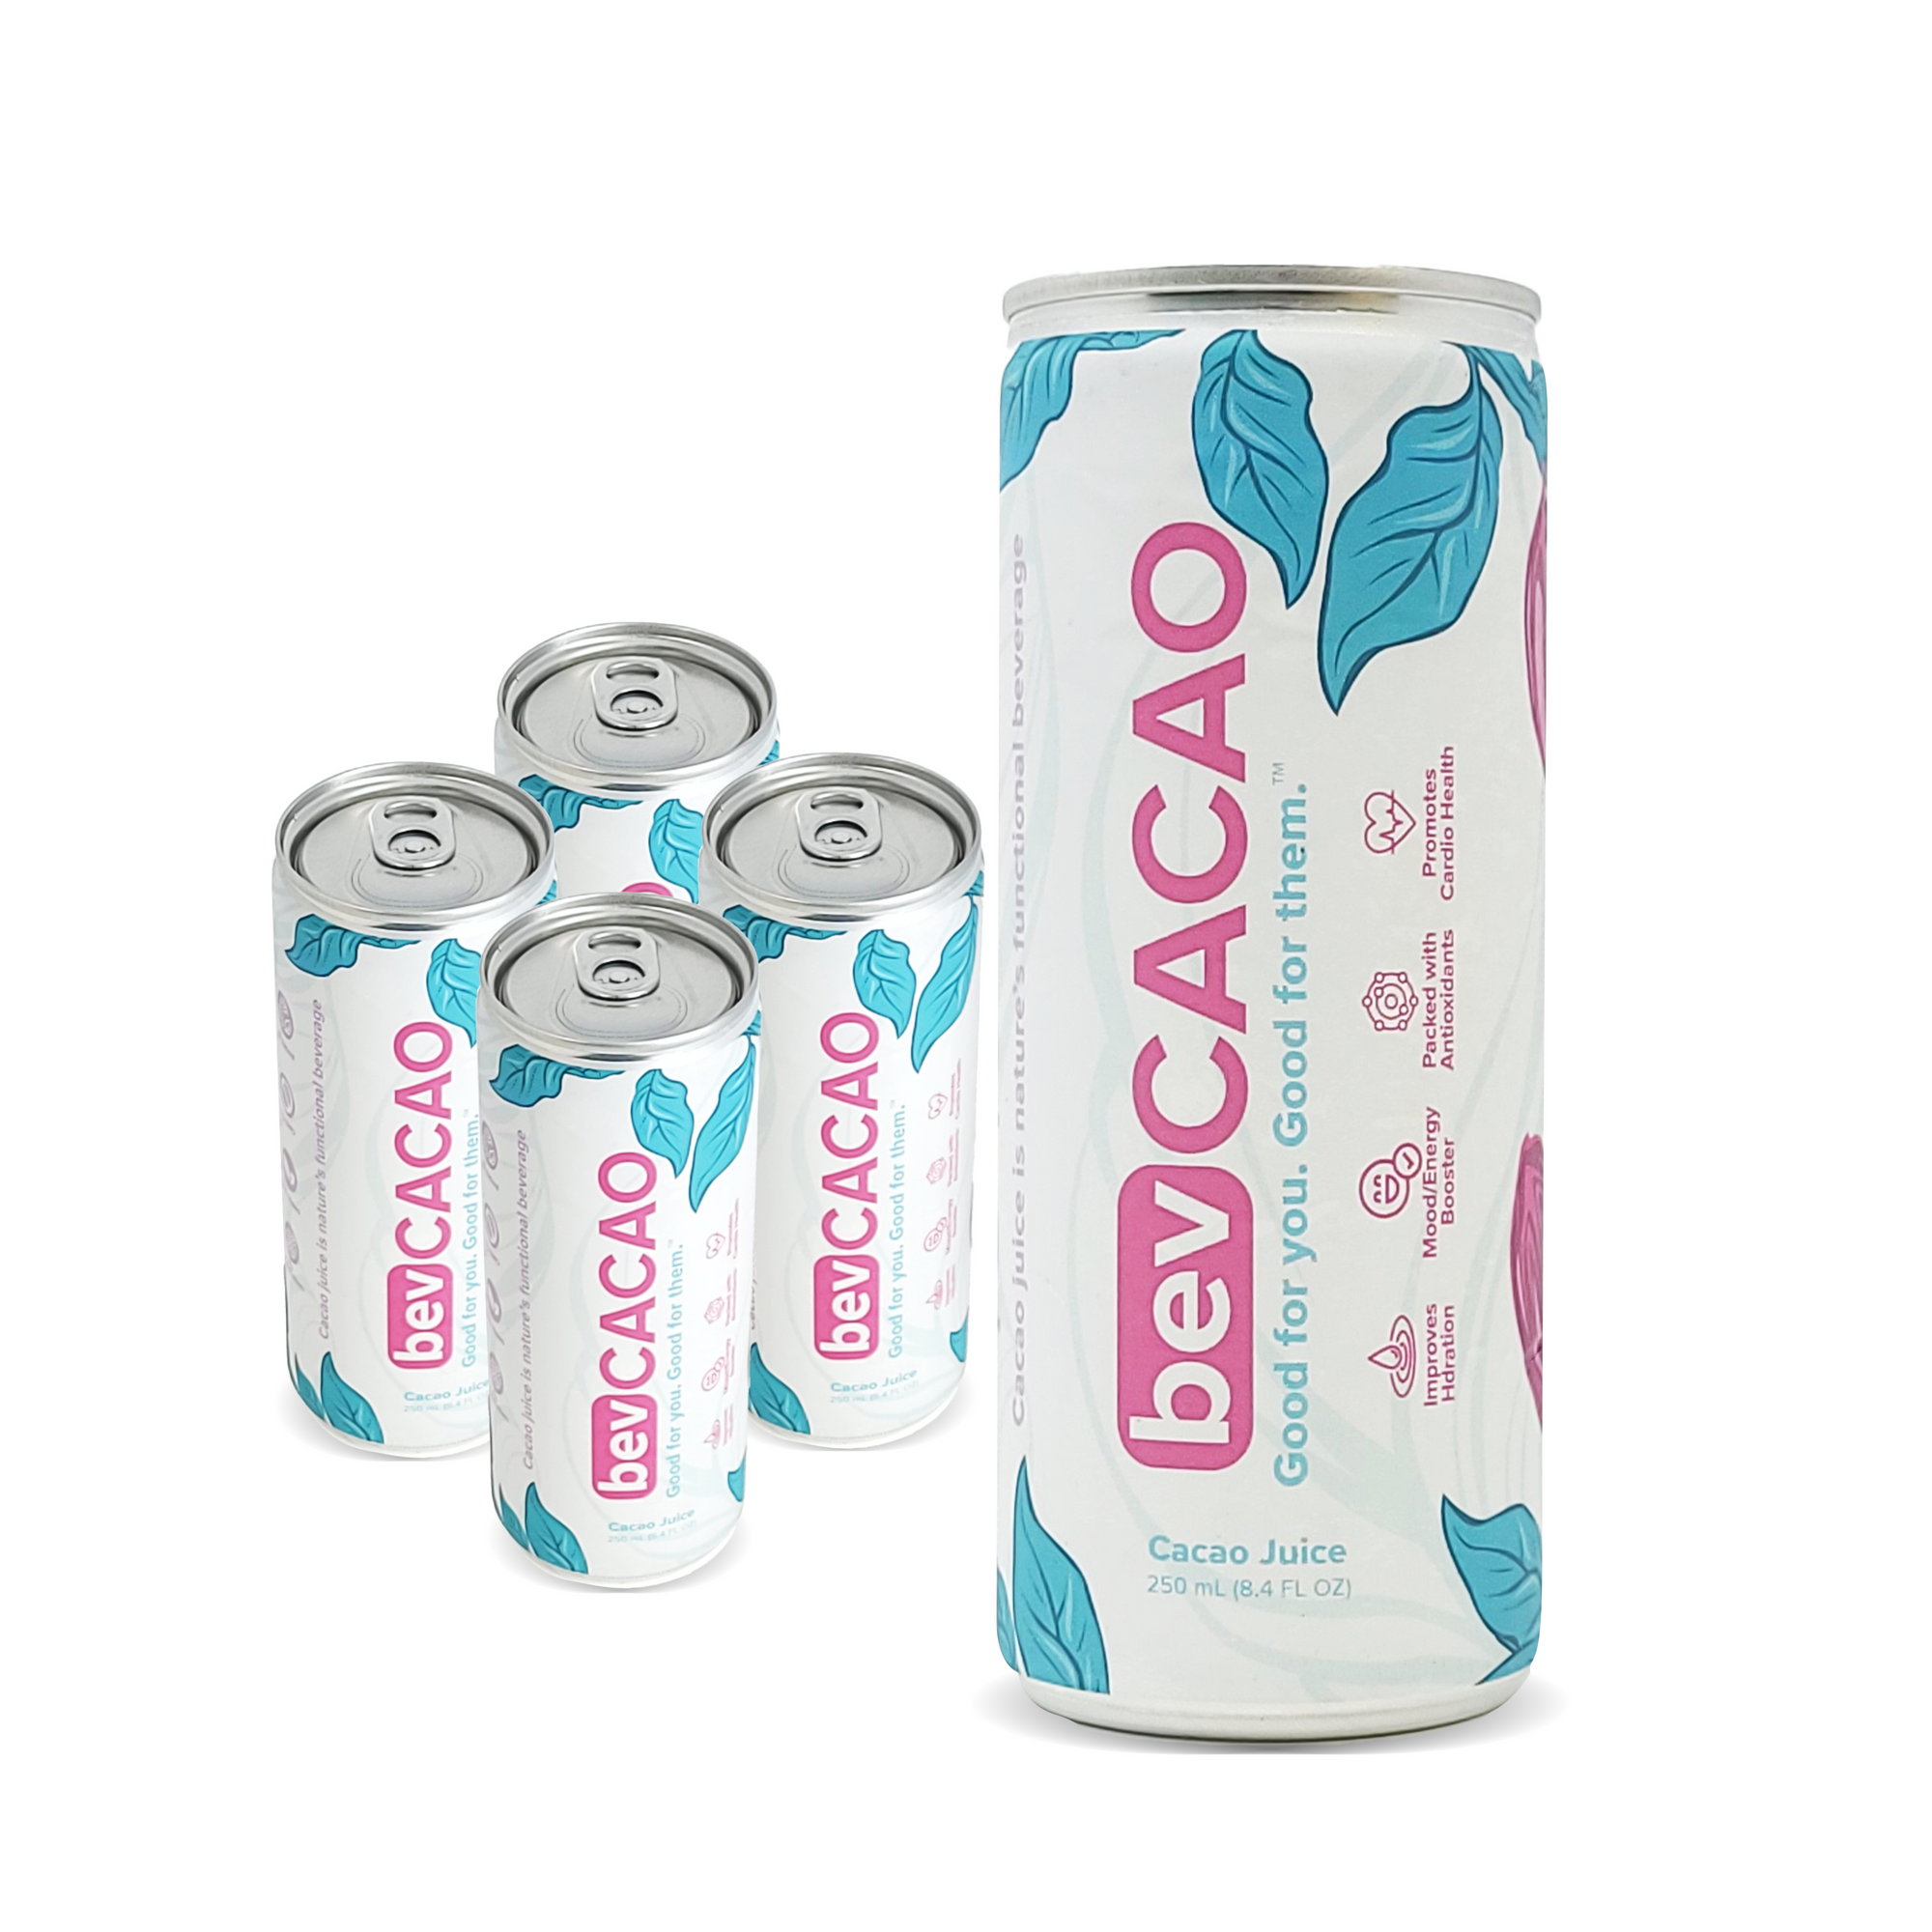 bevCACAO